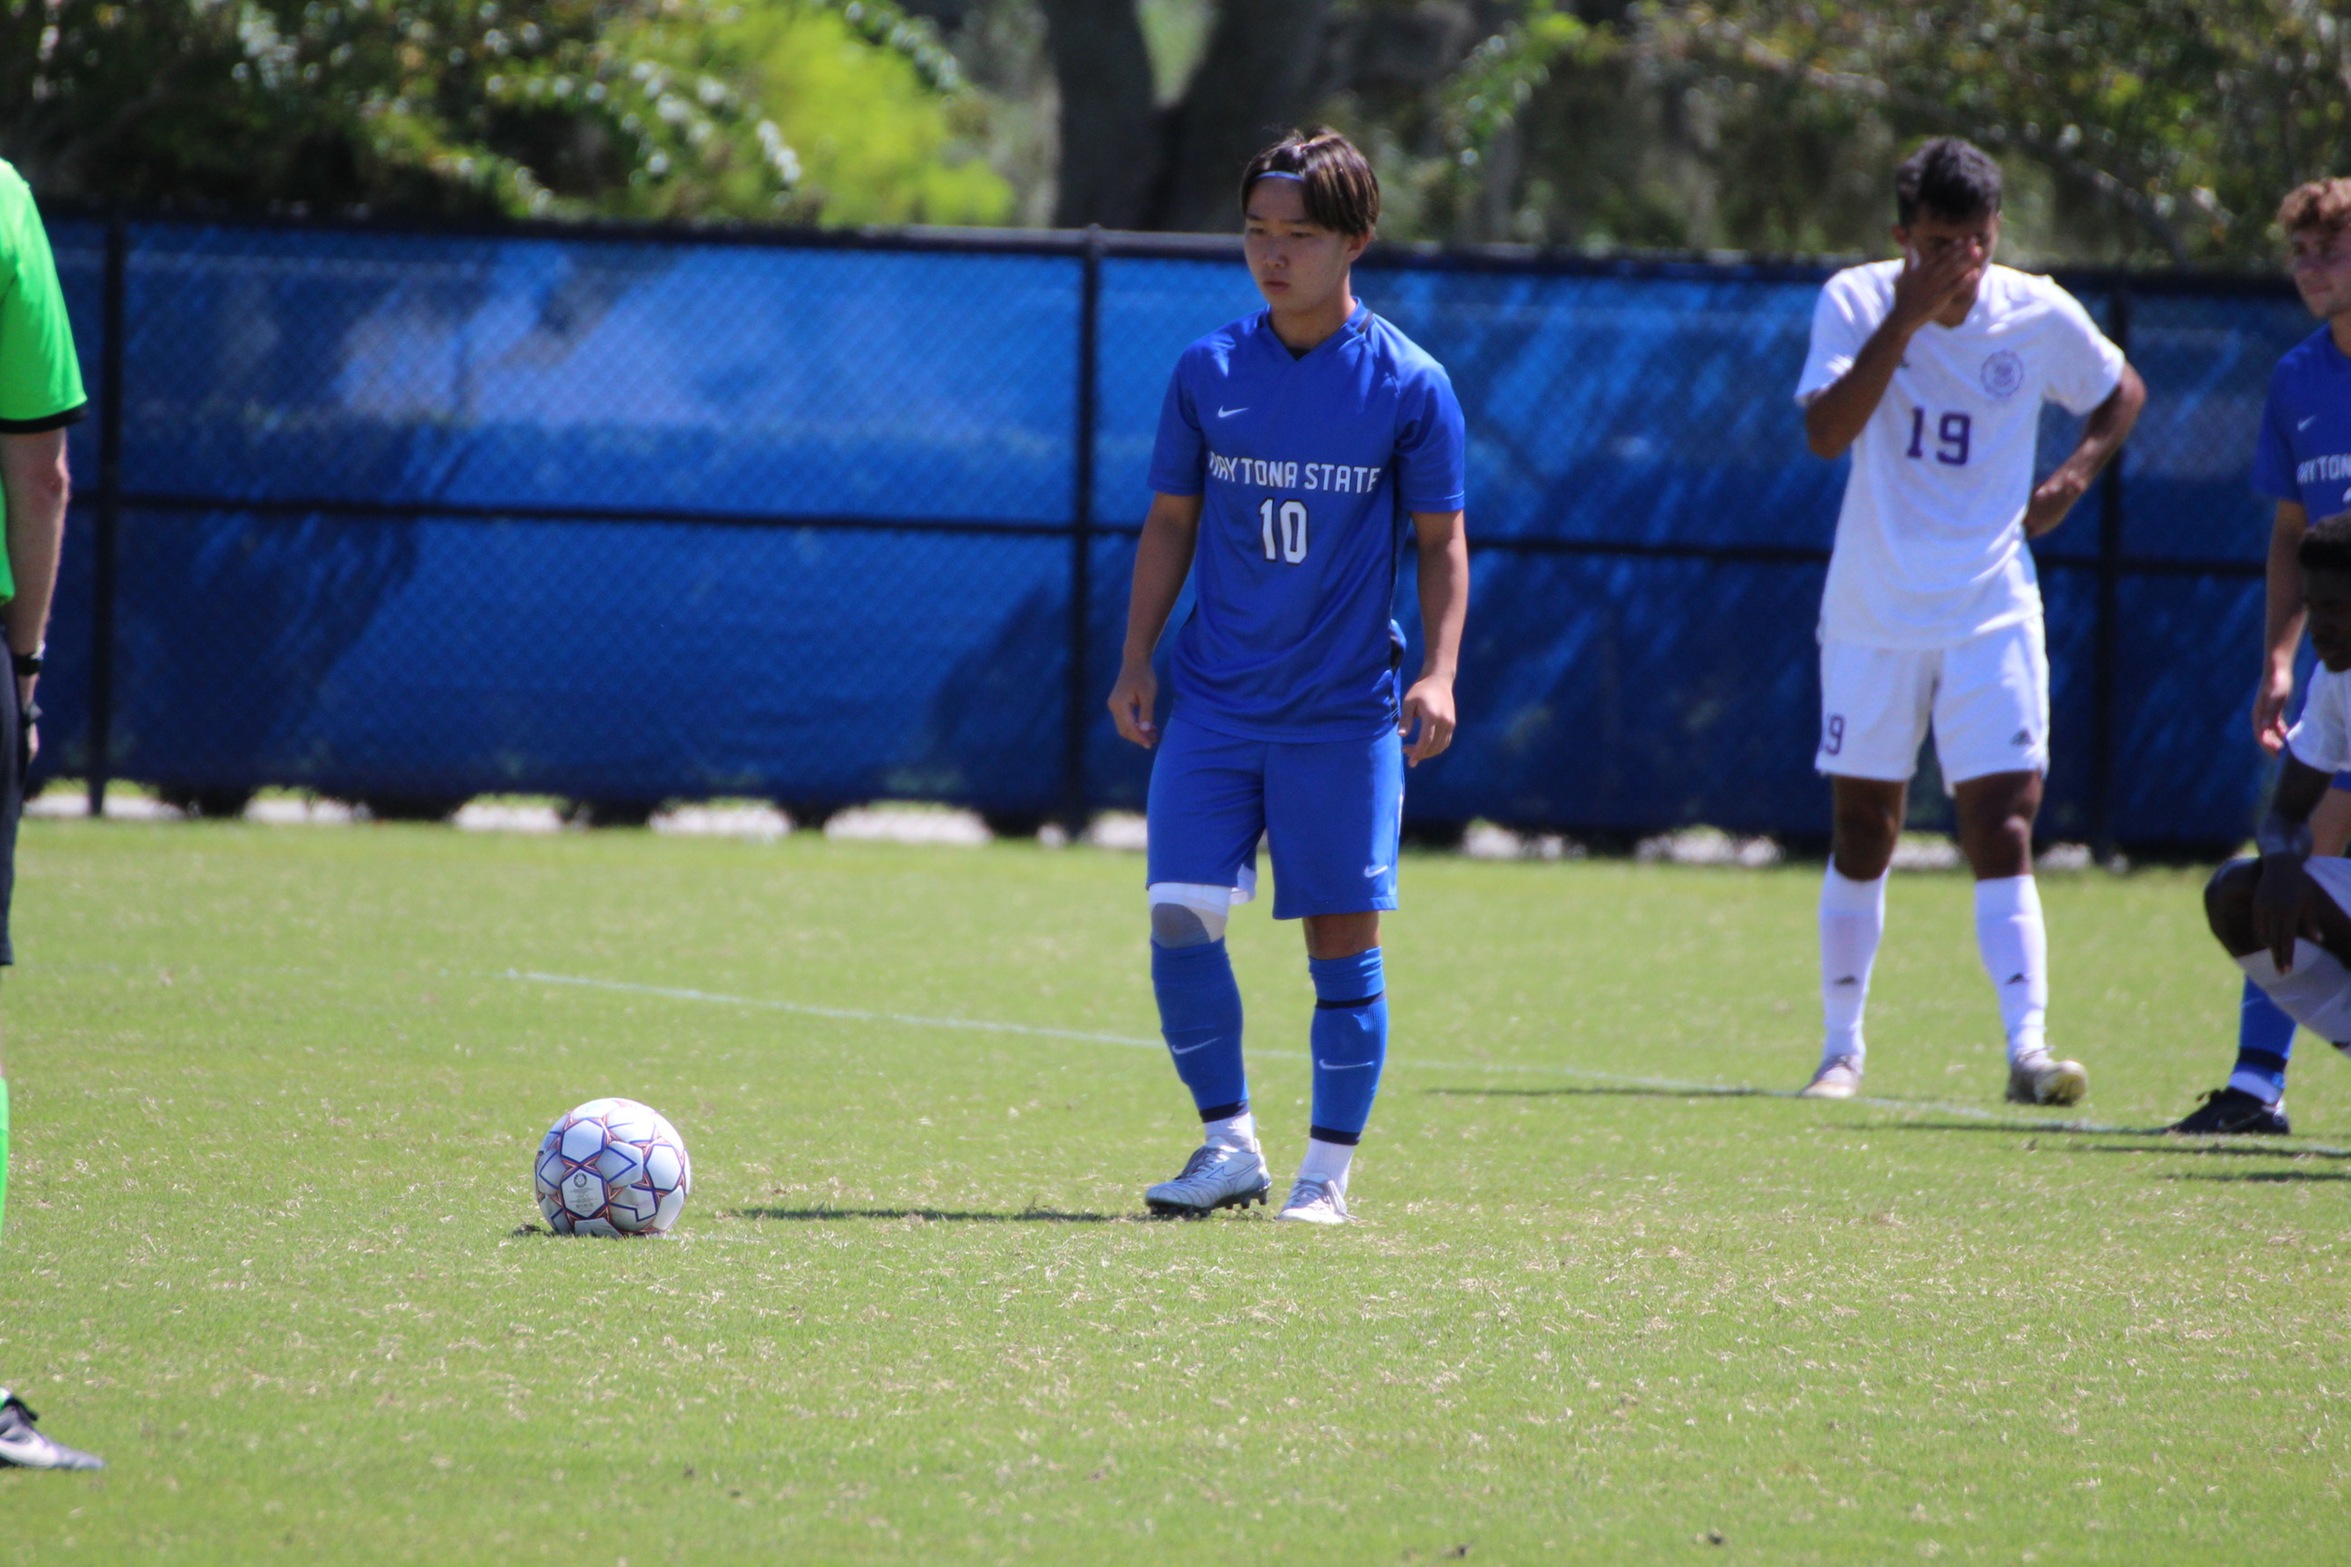 Daytona State Men’s Soccer Goes 2-0 on the Weekend